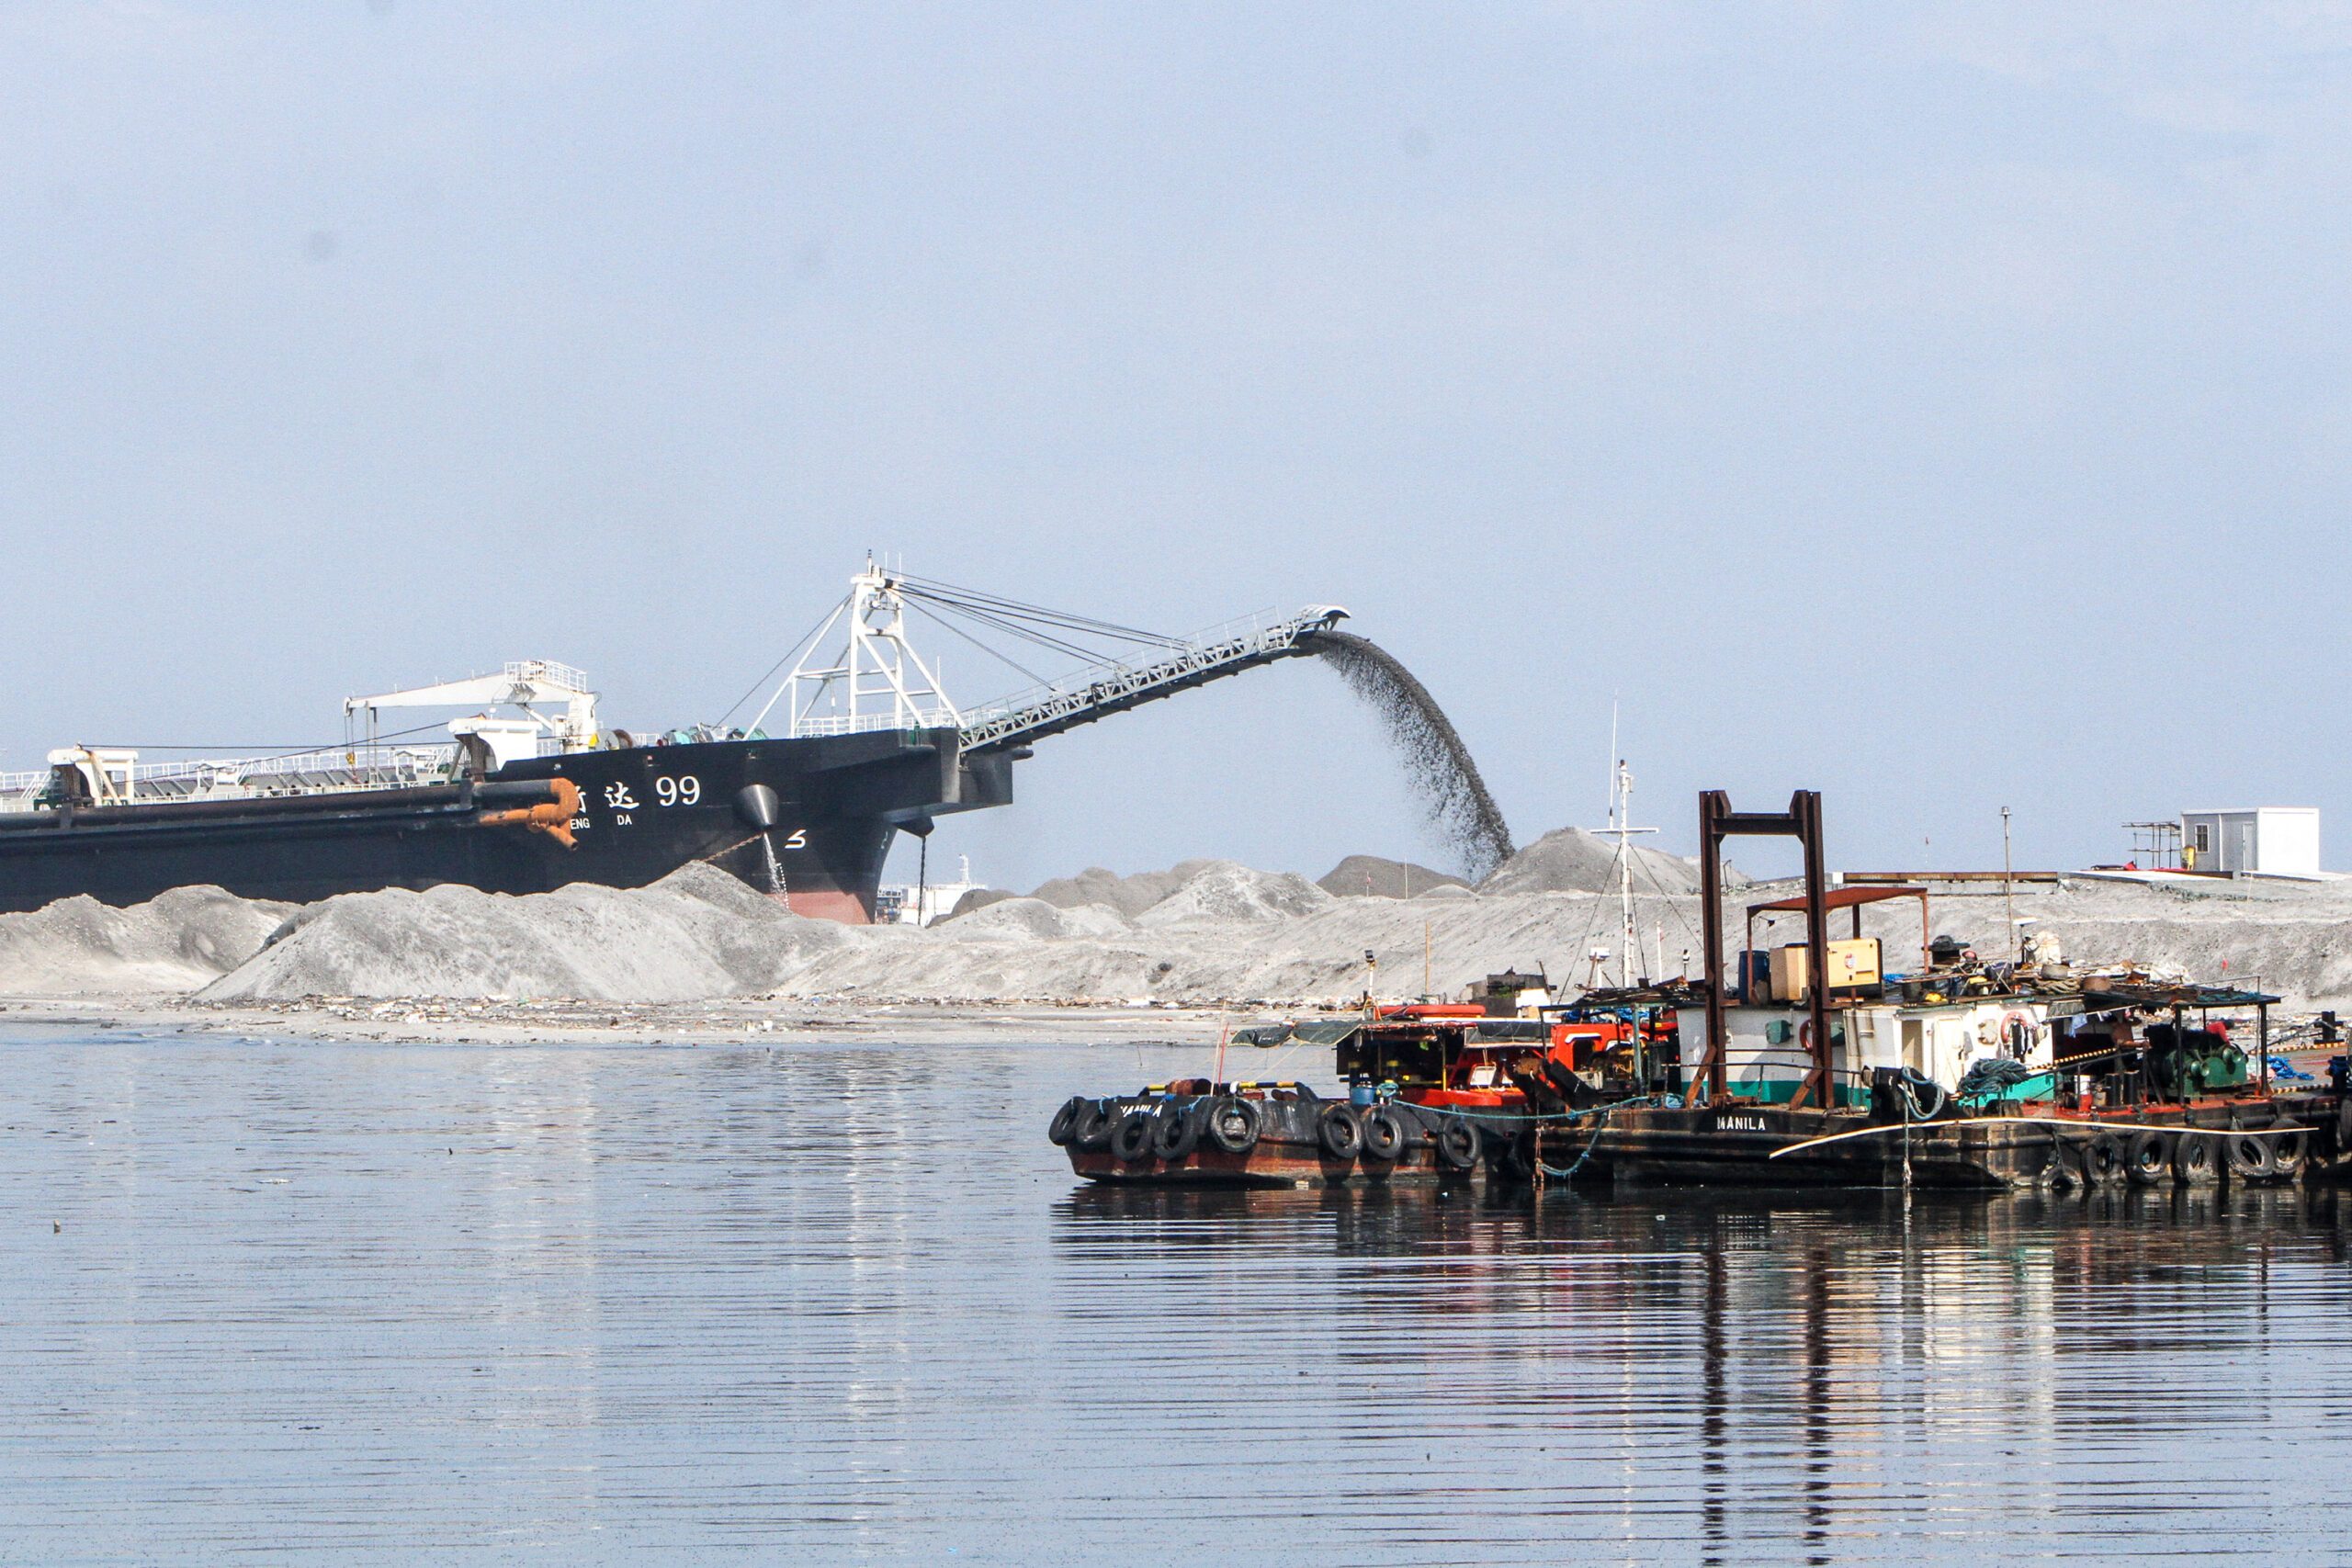 DENR: All Manila Bay reclamation projects suspended, under review